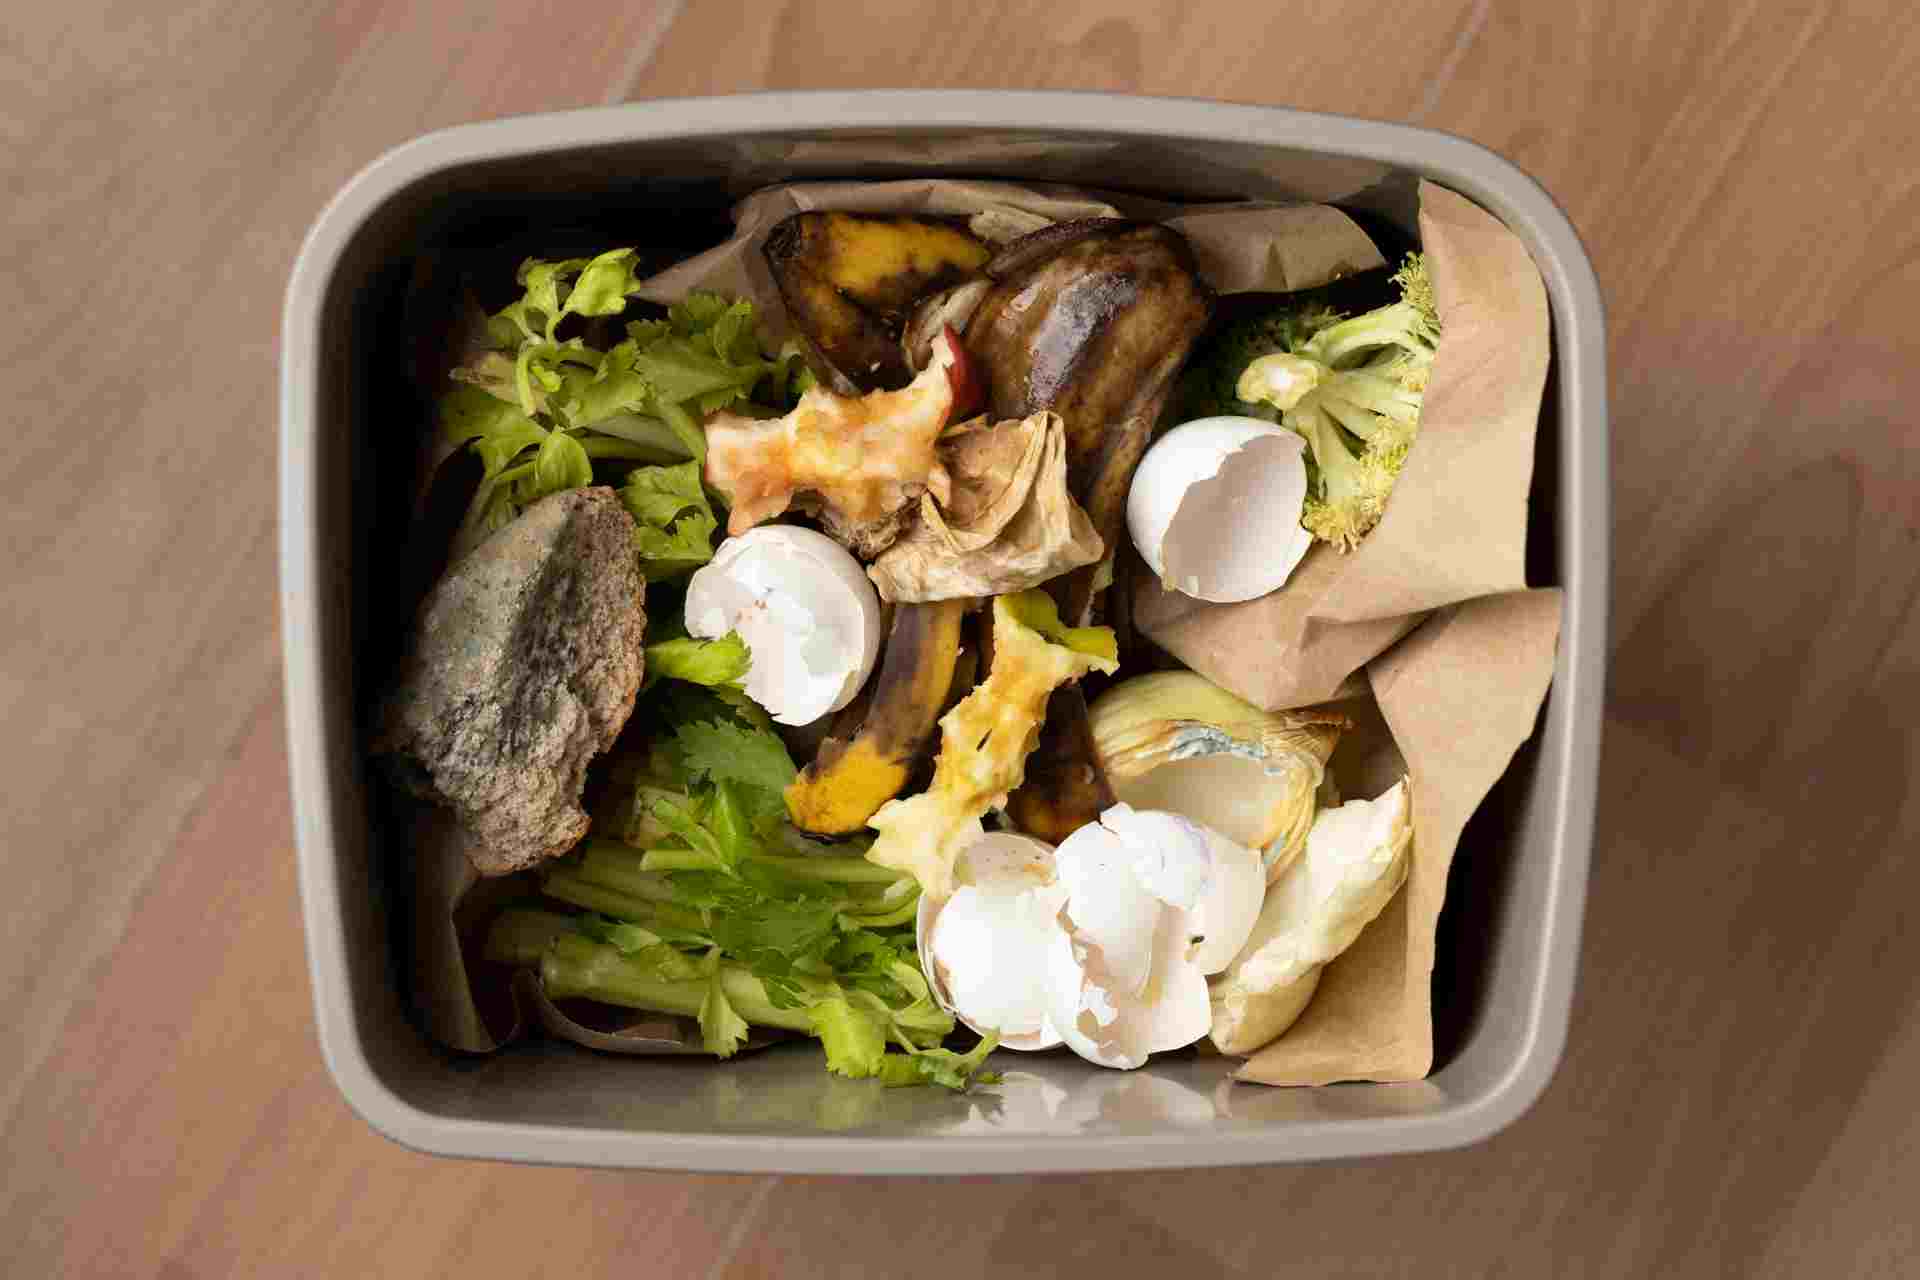 Food Waste Disposal and Reduction (Level 2)